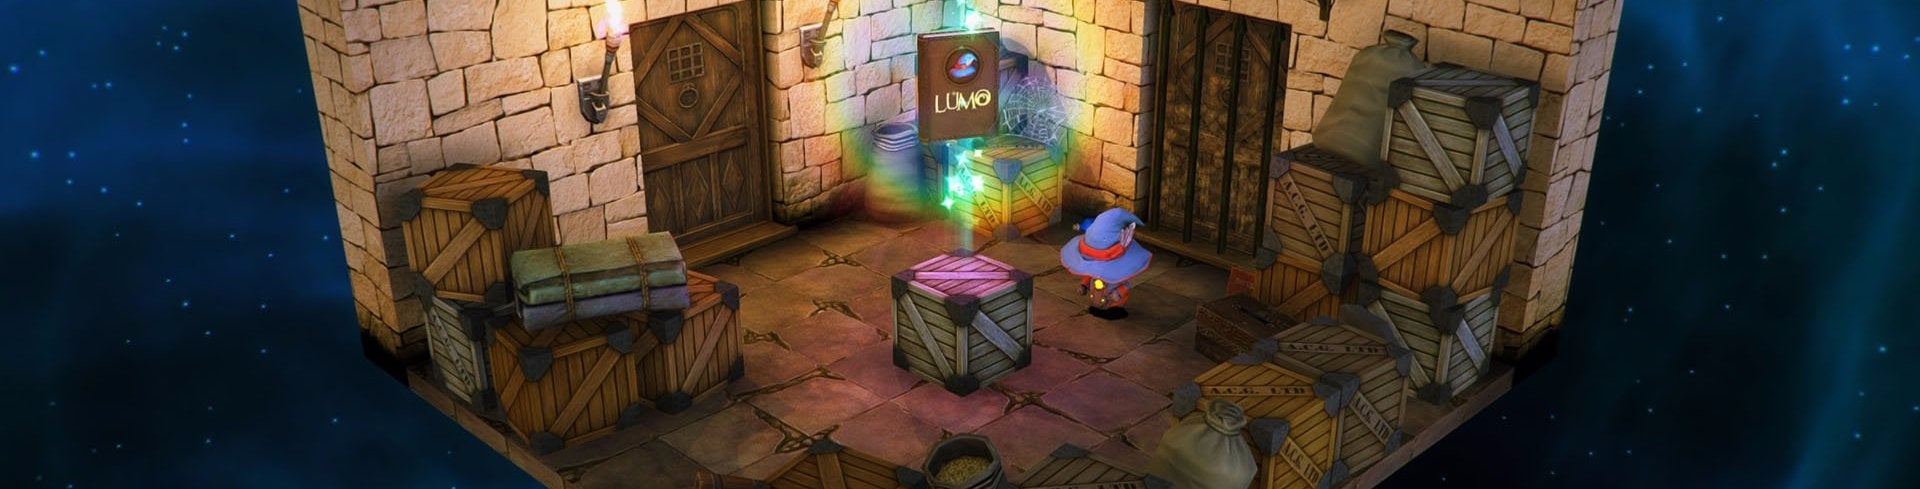 Image for Lumo review